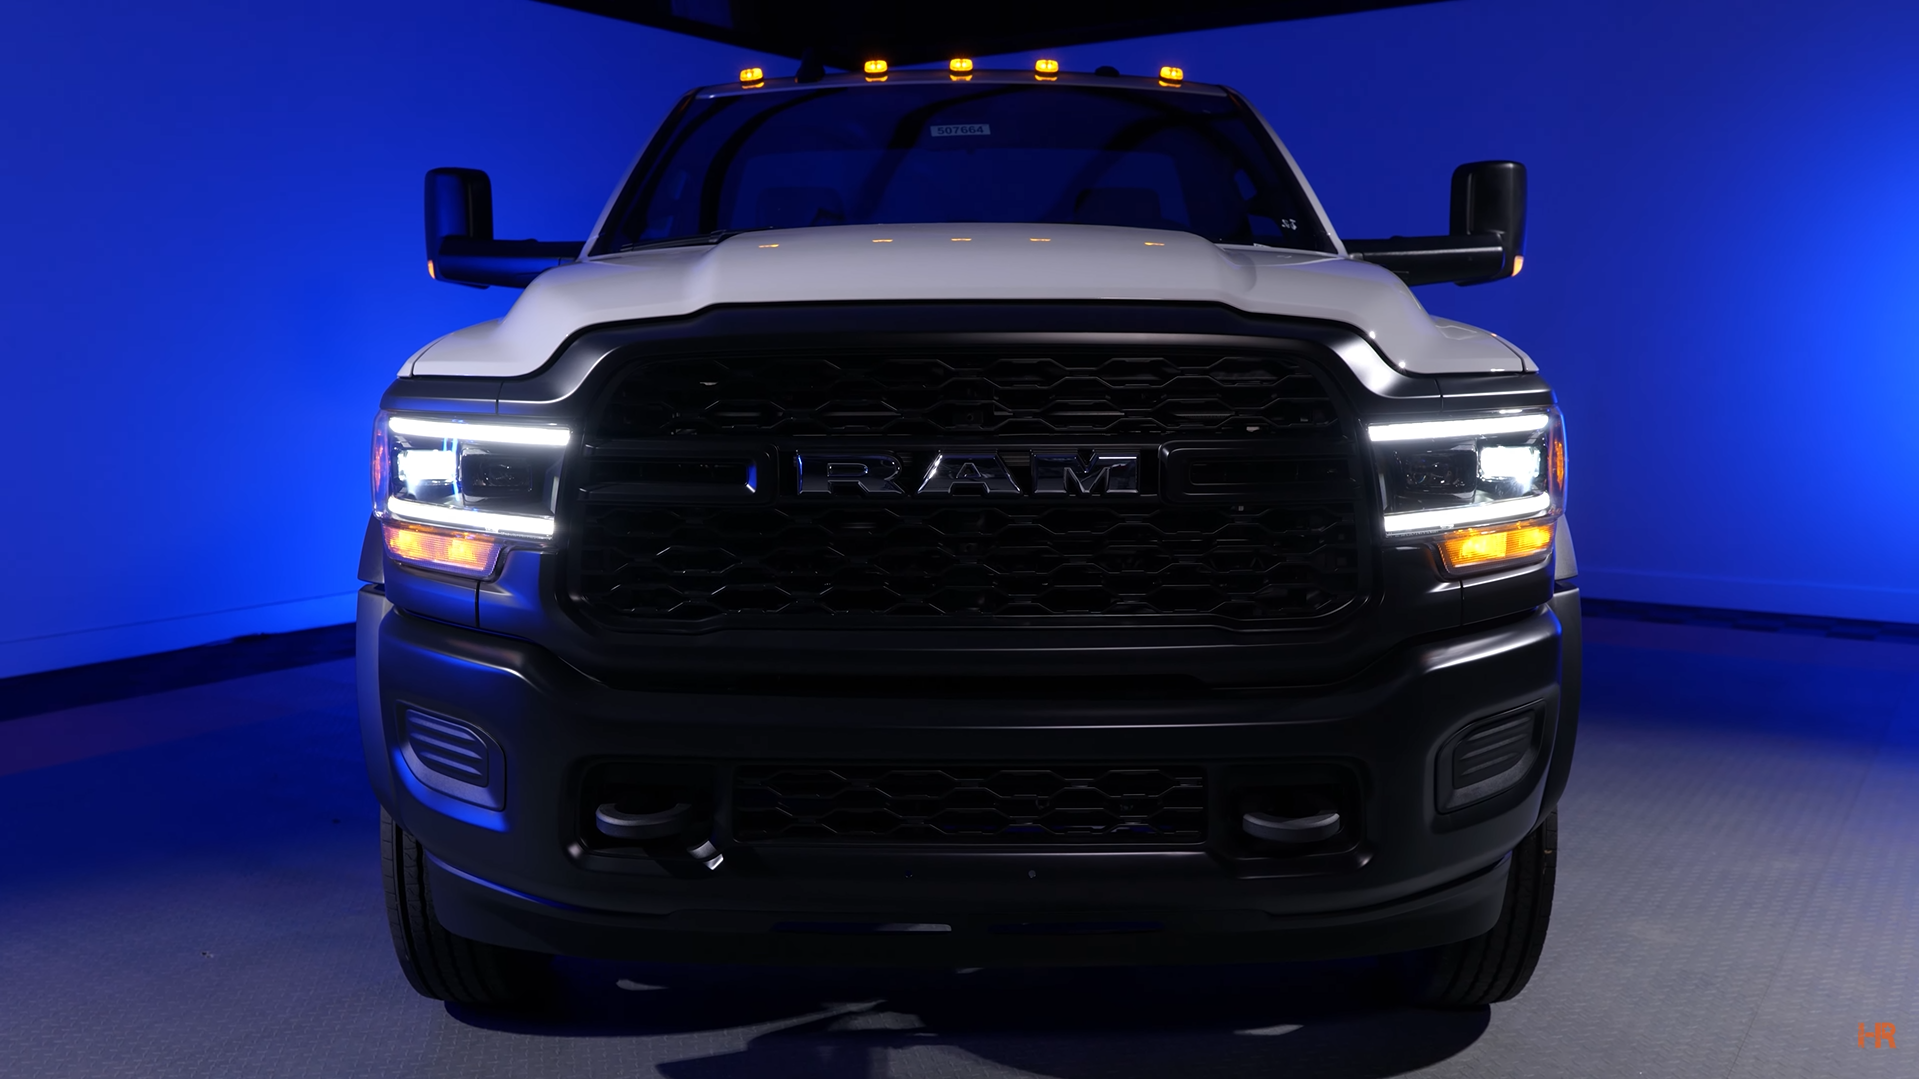 The front of a Dodge Ram HD with Morimoto XB Hybrid Headlights.